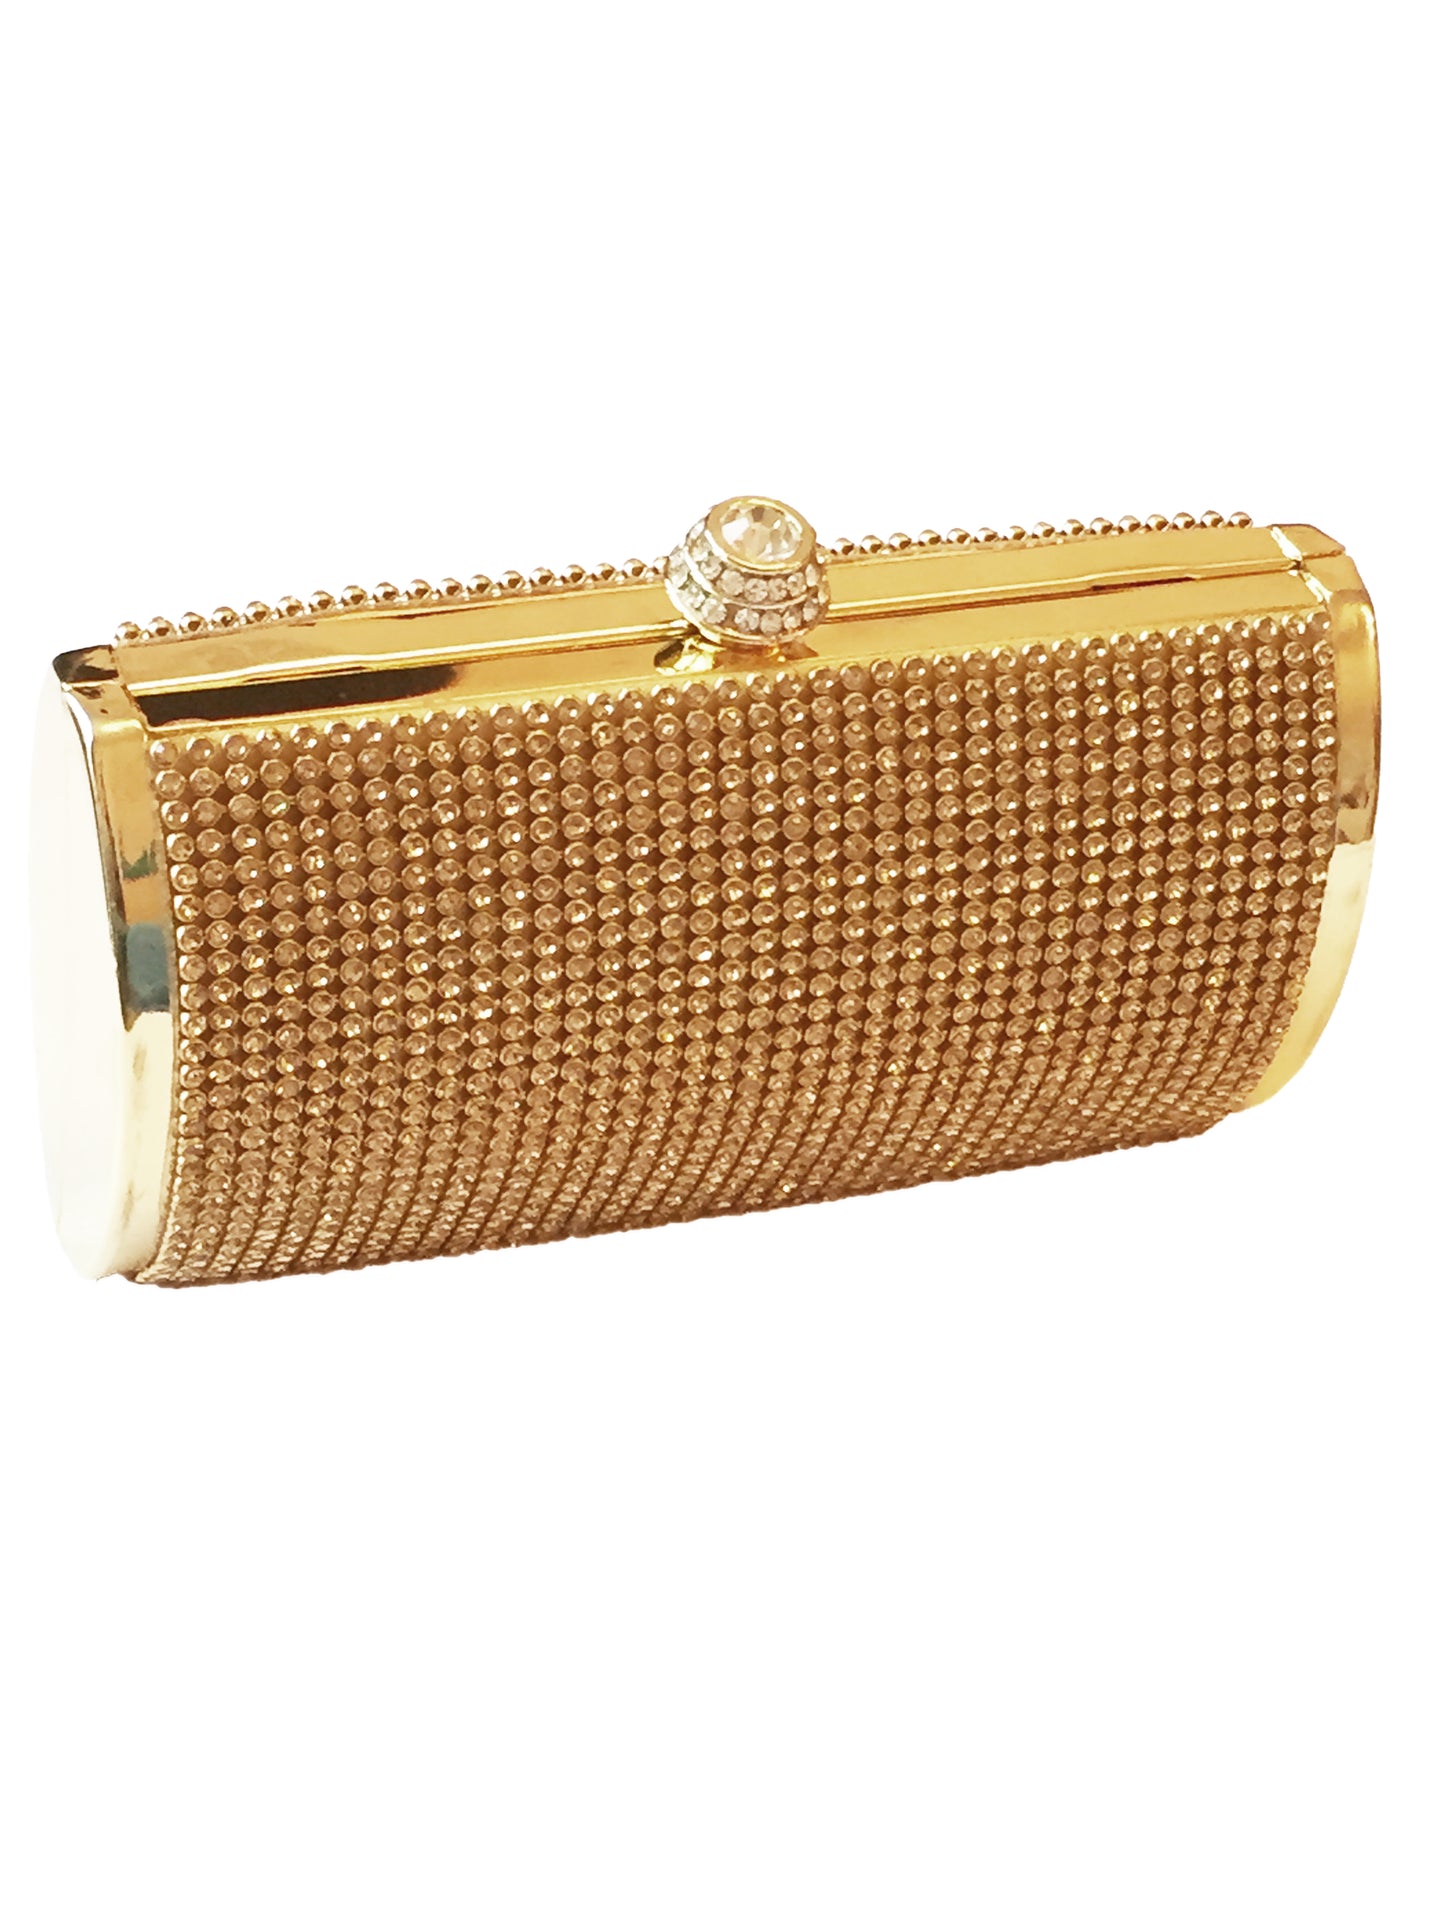 Gold Crystal Clutch Bag, This Gorgeous, Glamorous Gold clutch bag portrays luxury at its finest